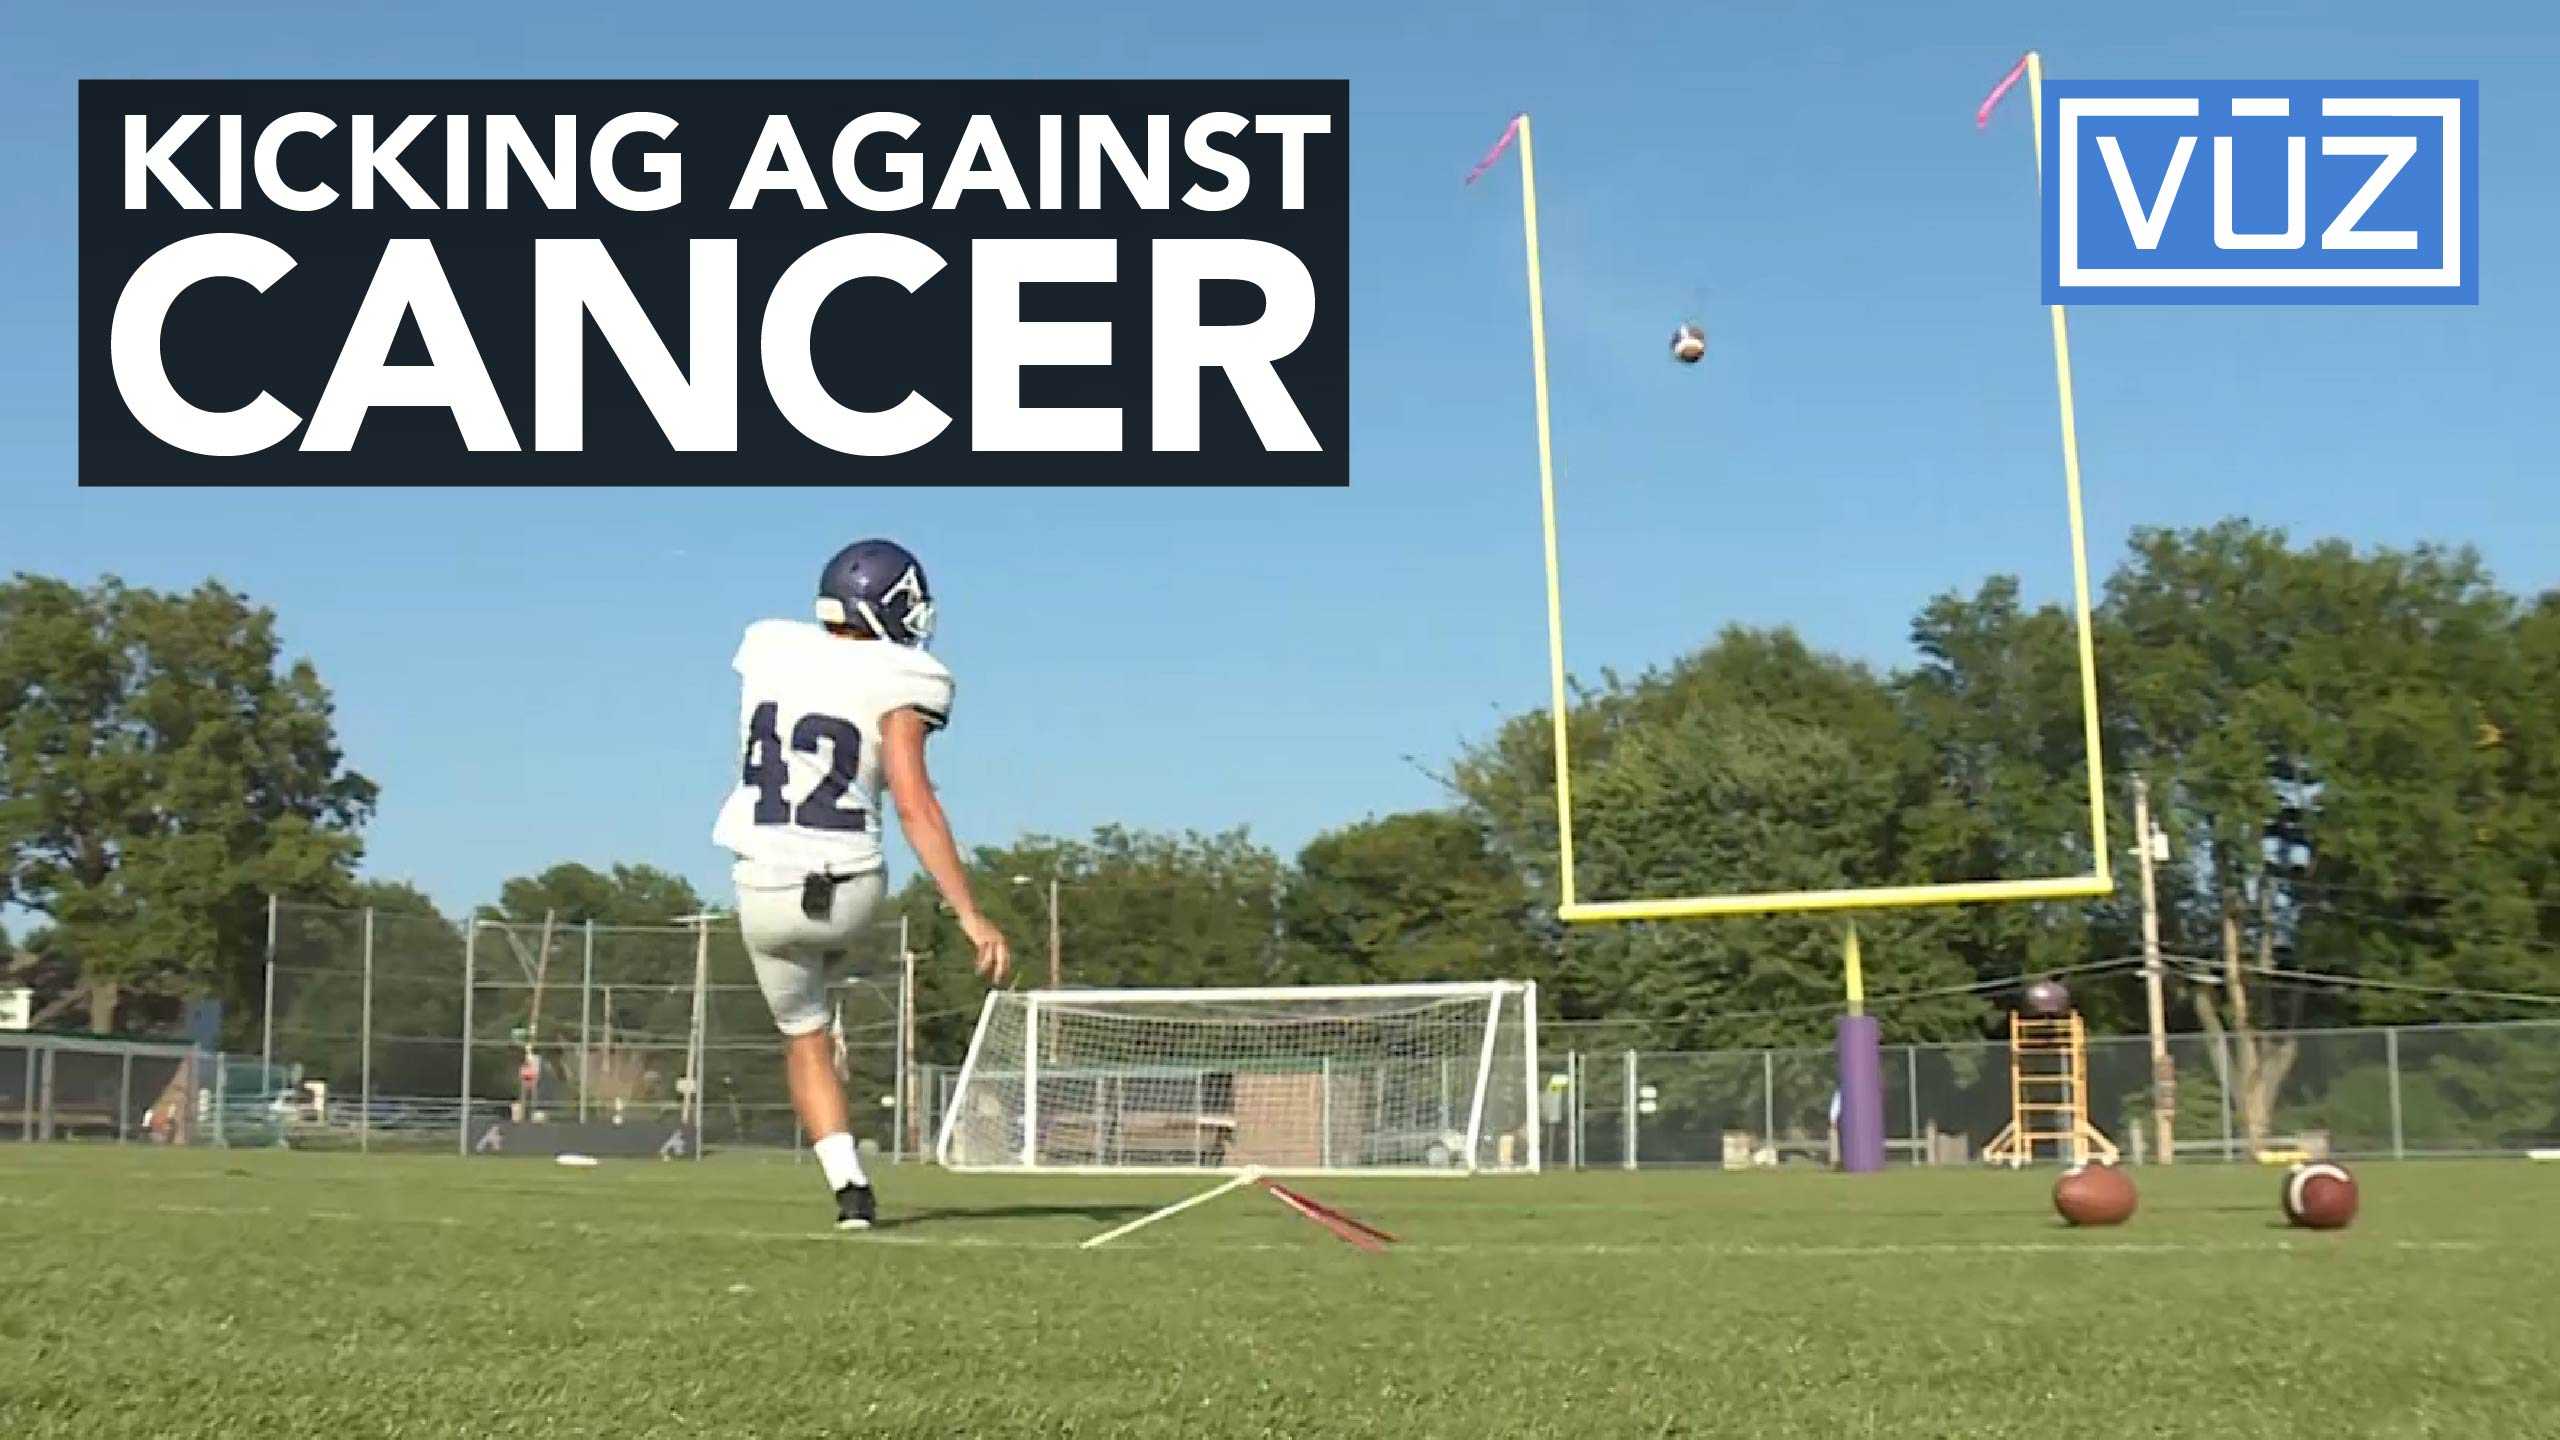 Every point this kicker scores helps fund cancer research